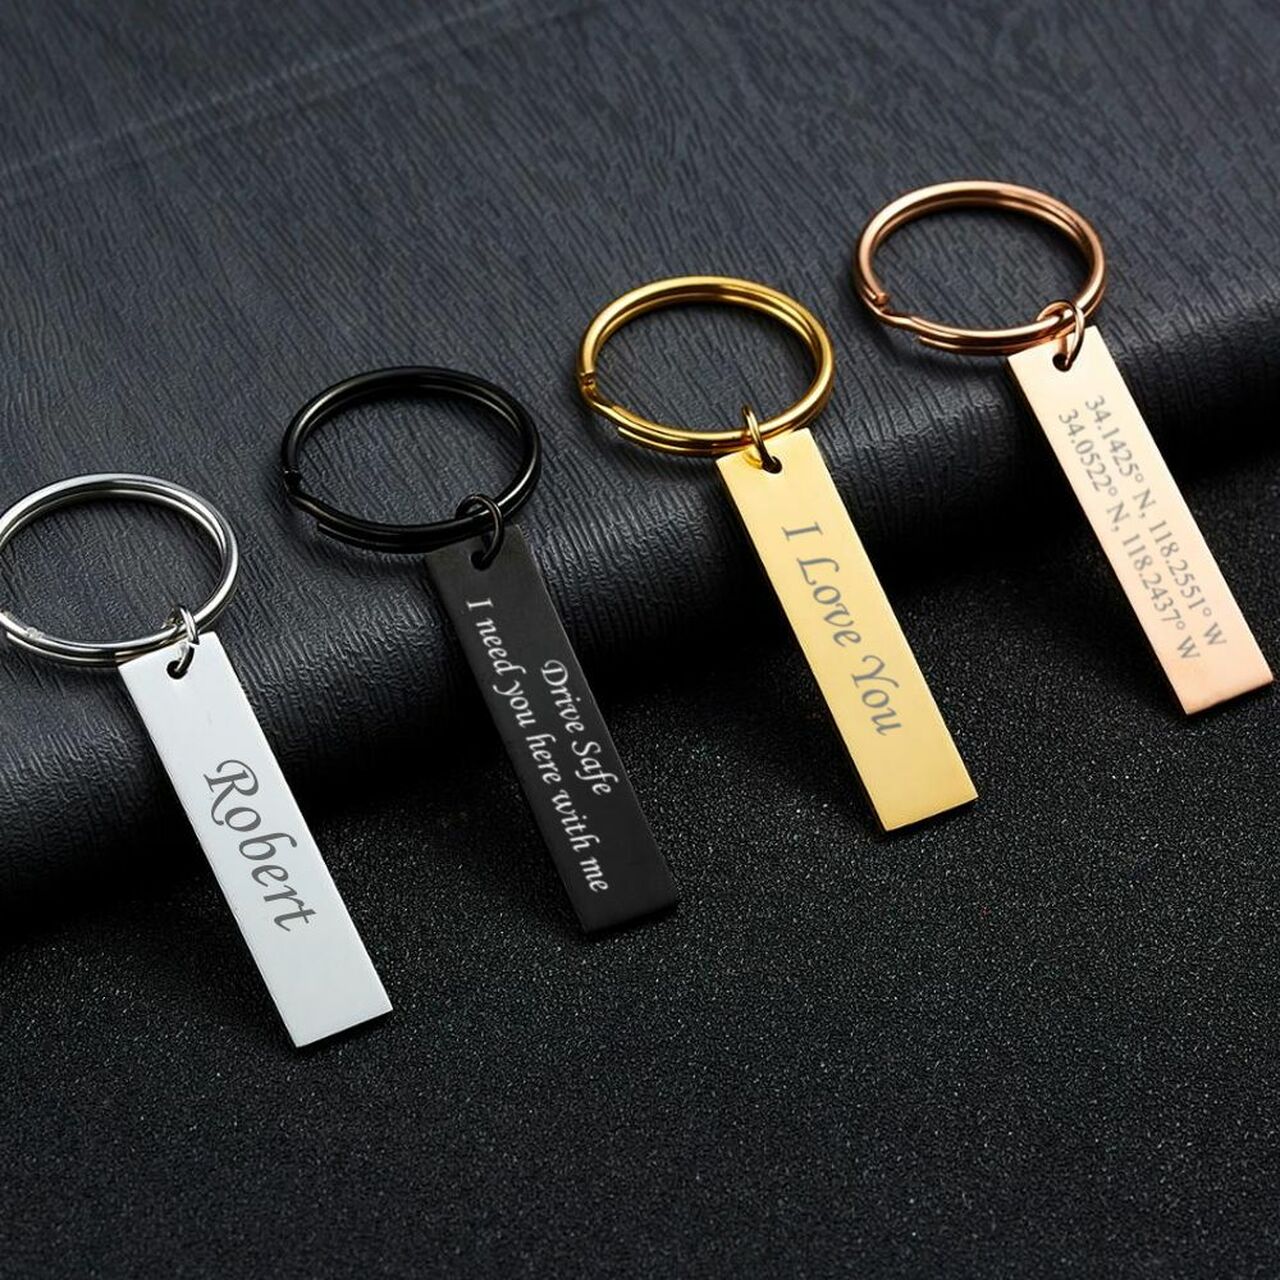 Personalized Quality Stainless Steel Custom Keychain Personalized Keychain Personalized Quality Stainless Steel Custom Keychain